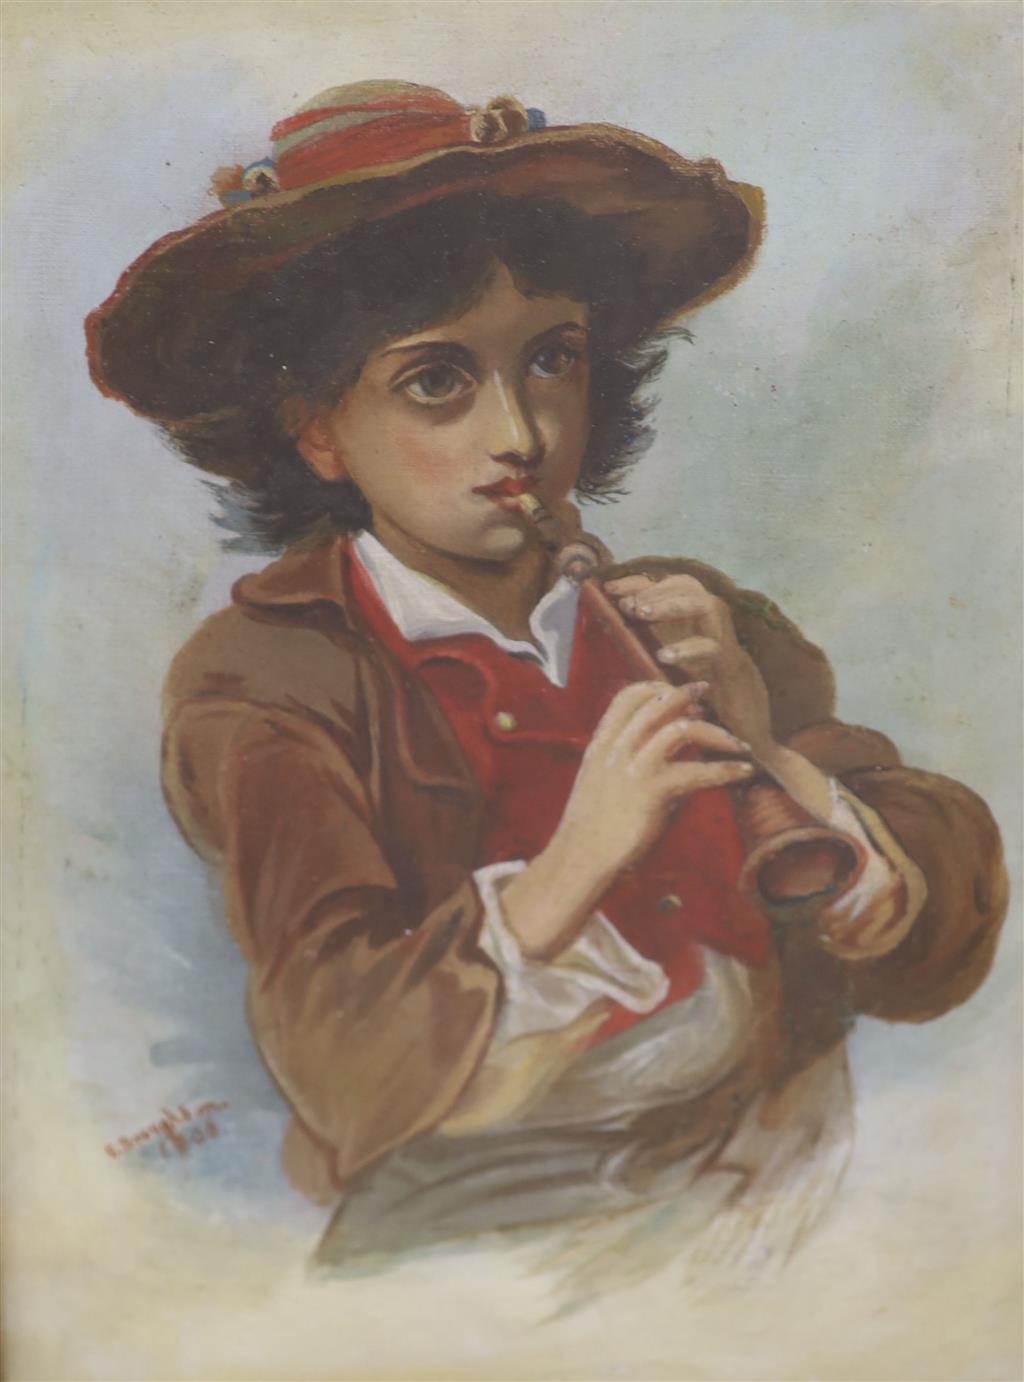 E. Broughton, oil on canvas, Portrait of an alpine boy playing a recorder, signed and dated 1906, 35 x 24cm